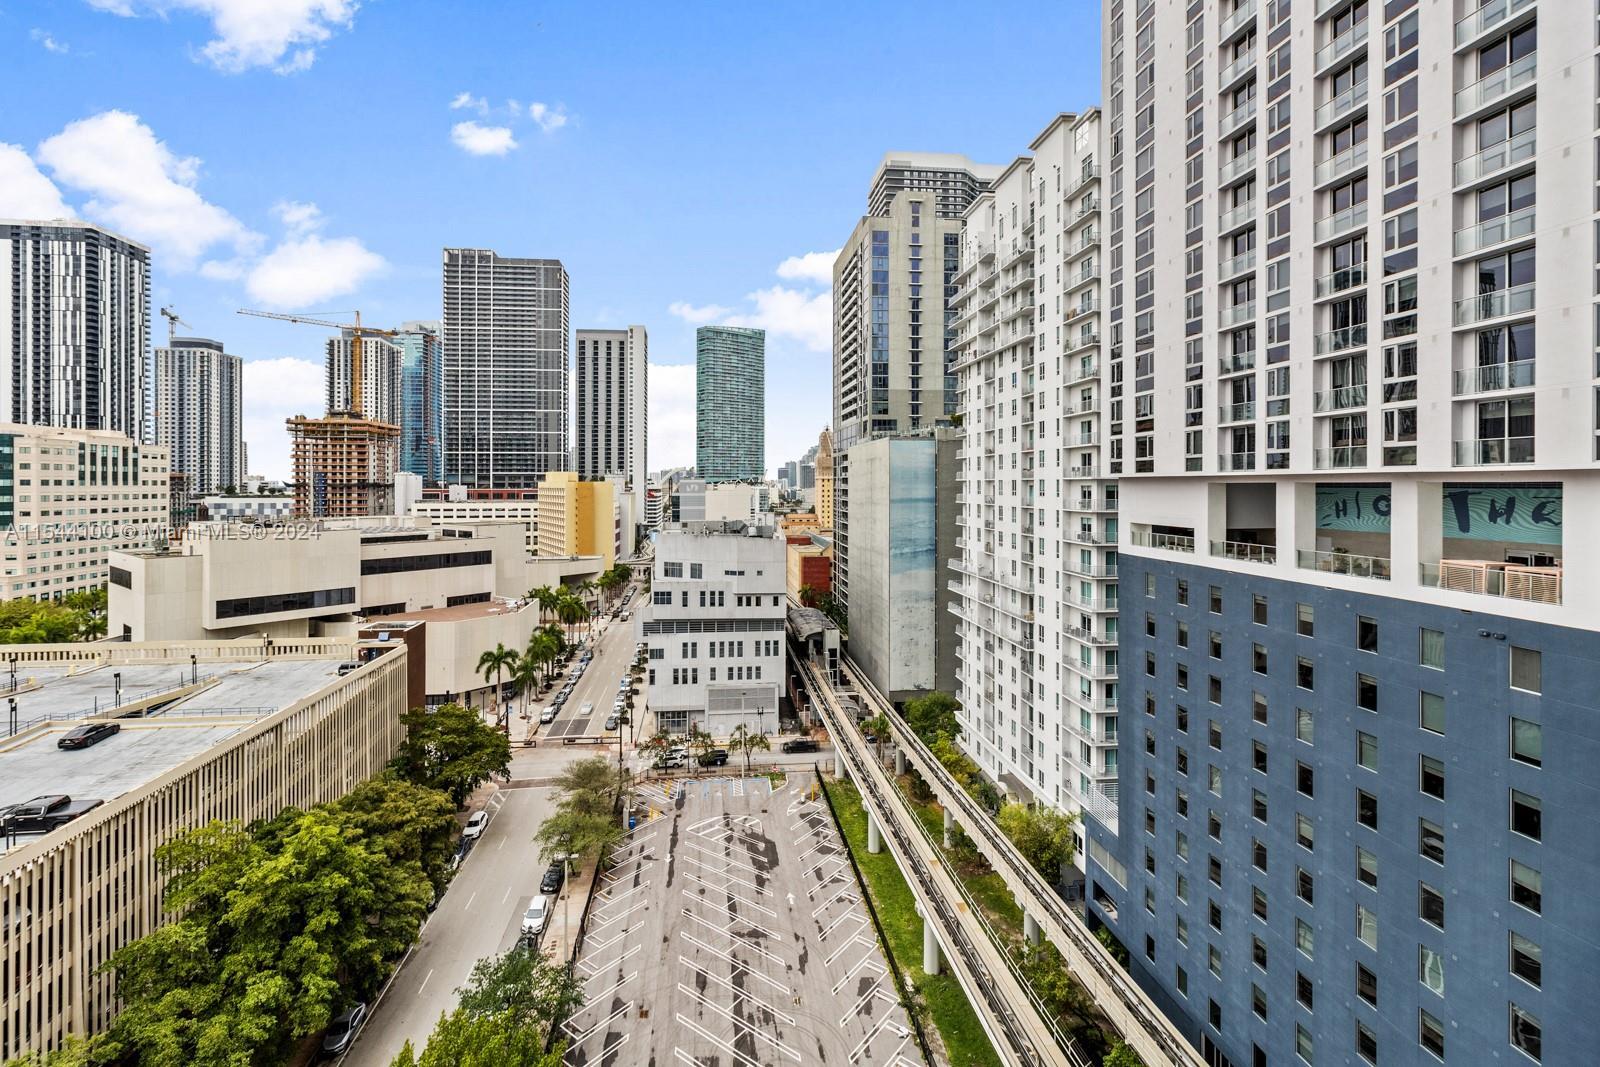 FANTASTIC VIEWS OF THE CITY FROM THIS 14TH FLOOR RESIDENCE IN THE HEART OF DOWNTOWN MIAMI! THIS SPAC